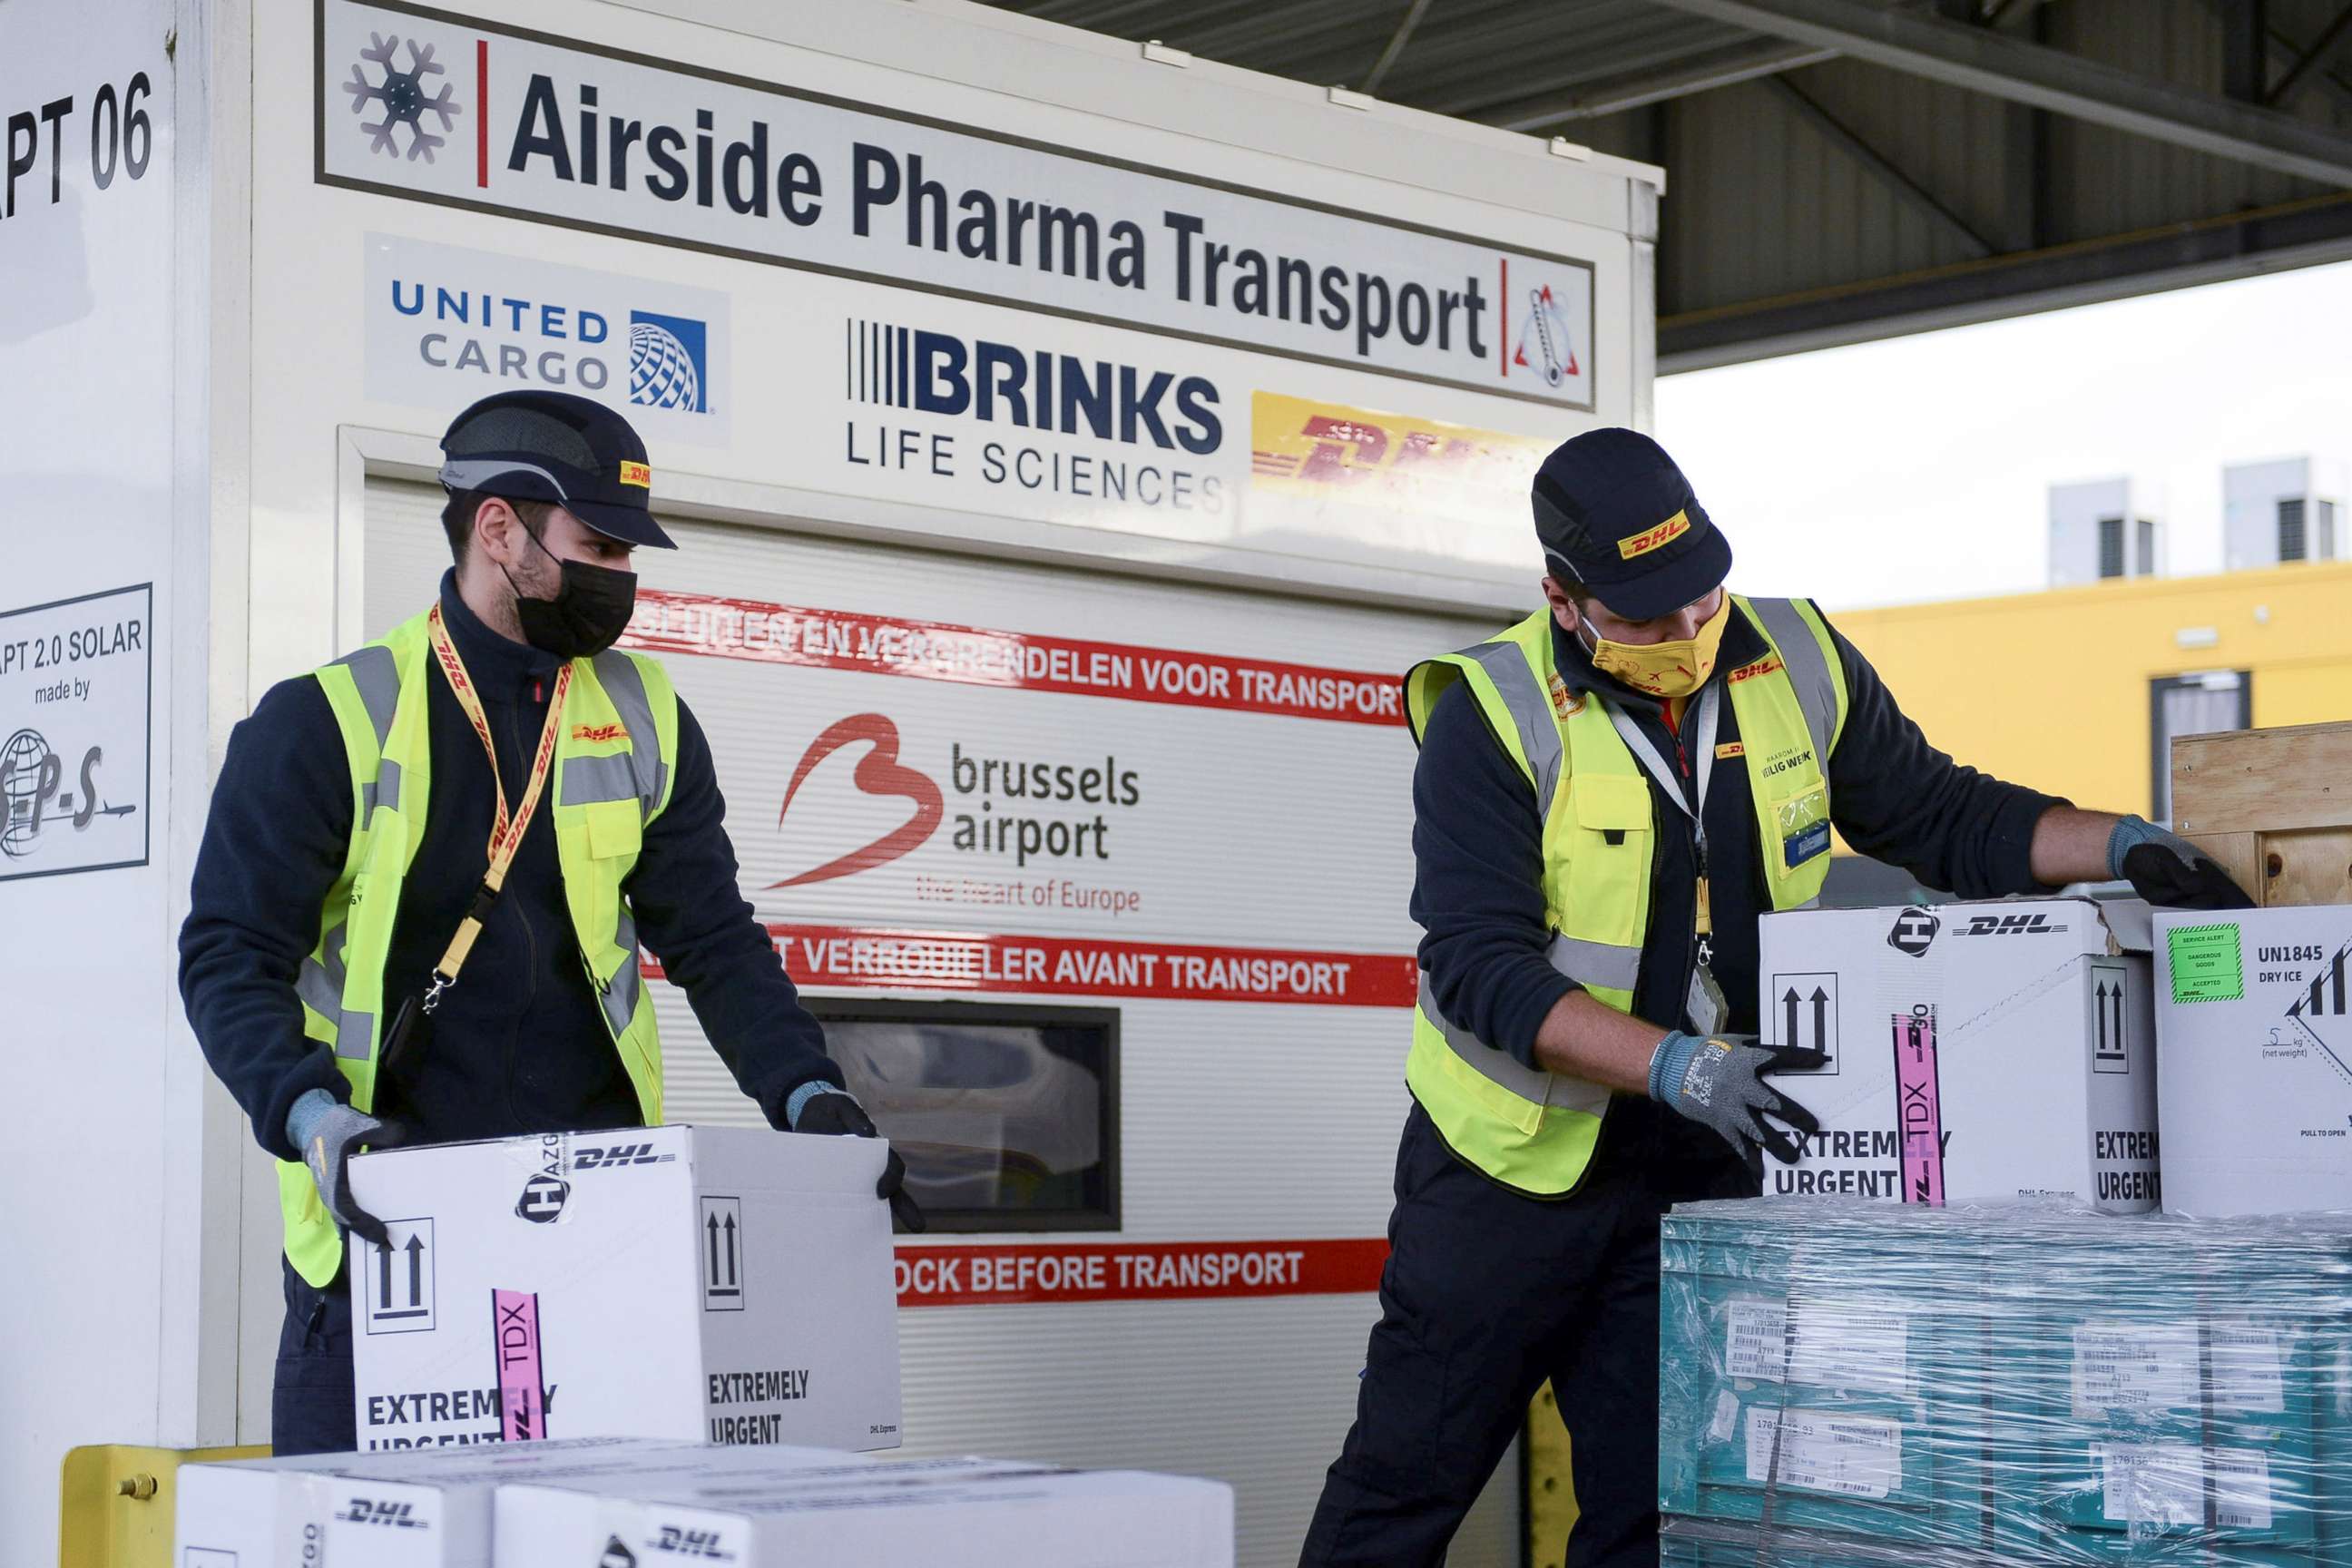 PHOTO: Workers prepare cool boxes to be transported by airplane, as Brussels International Airport prepares to transport vaccines and vaccine candidates for the coronavirus disease on Dec. 1, 2020 in Brussels.